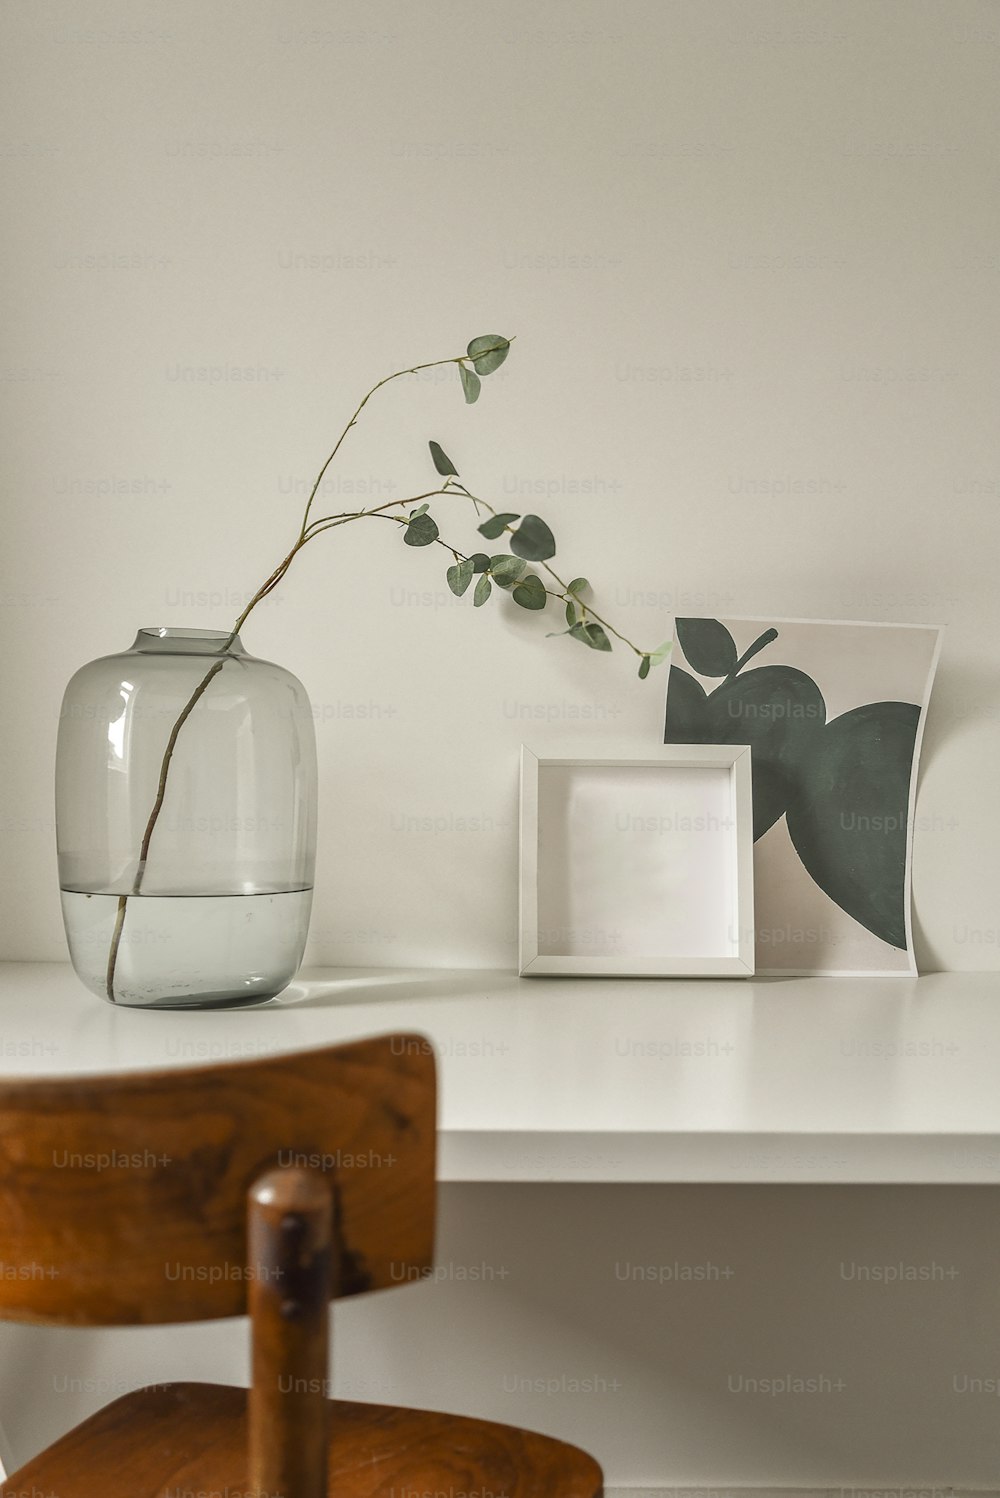 Simple minimalistic desk with decorative plant in a glass jar. Little workspace in a modern house